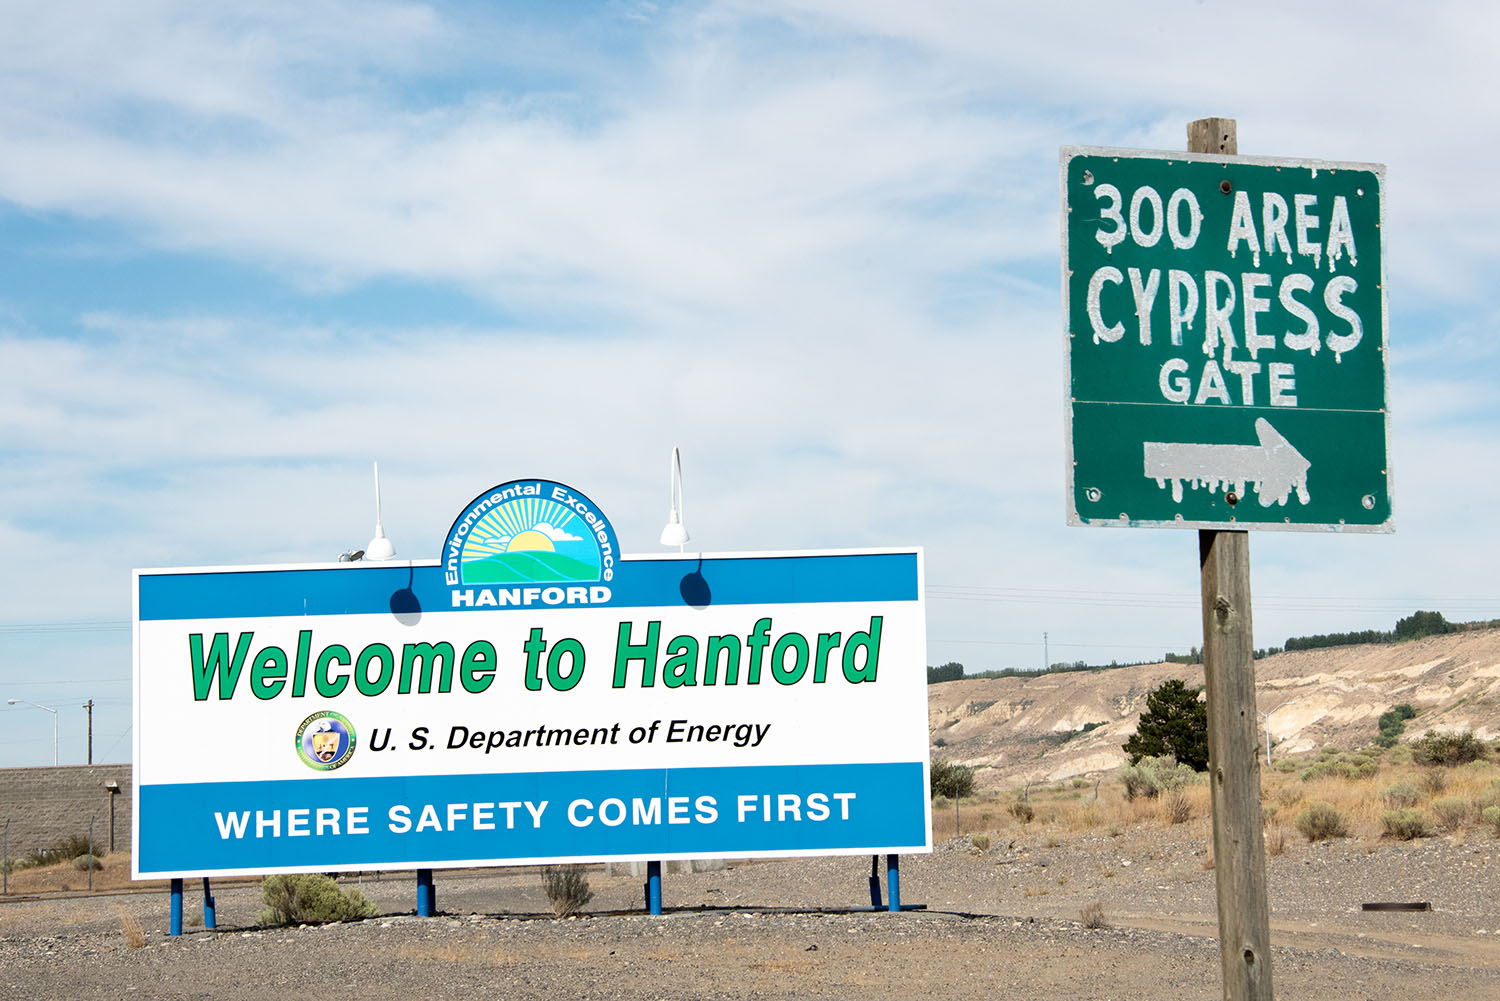 The Hanford Site, which is managed by the Department of Energy, is an area roughly half the size of Rhode Island. Though cleanup efforts have been underway at Hanford since 1989, hazardous materials remain in the site’s soil and groundwater along the Columbia River. Photography by Sean McDermott.